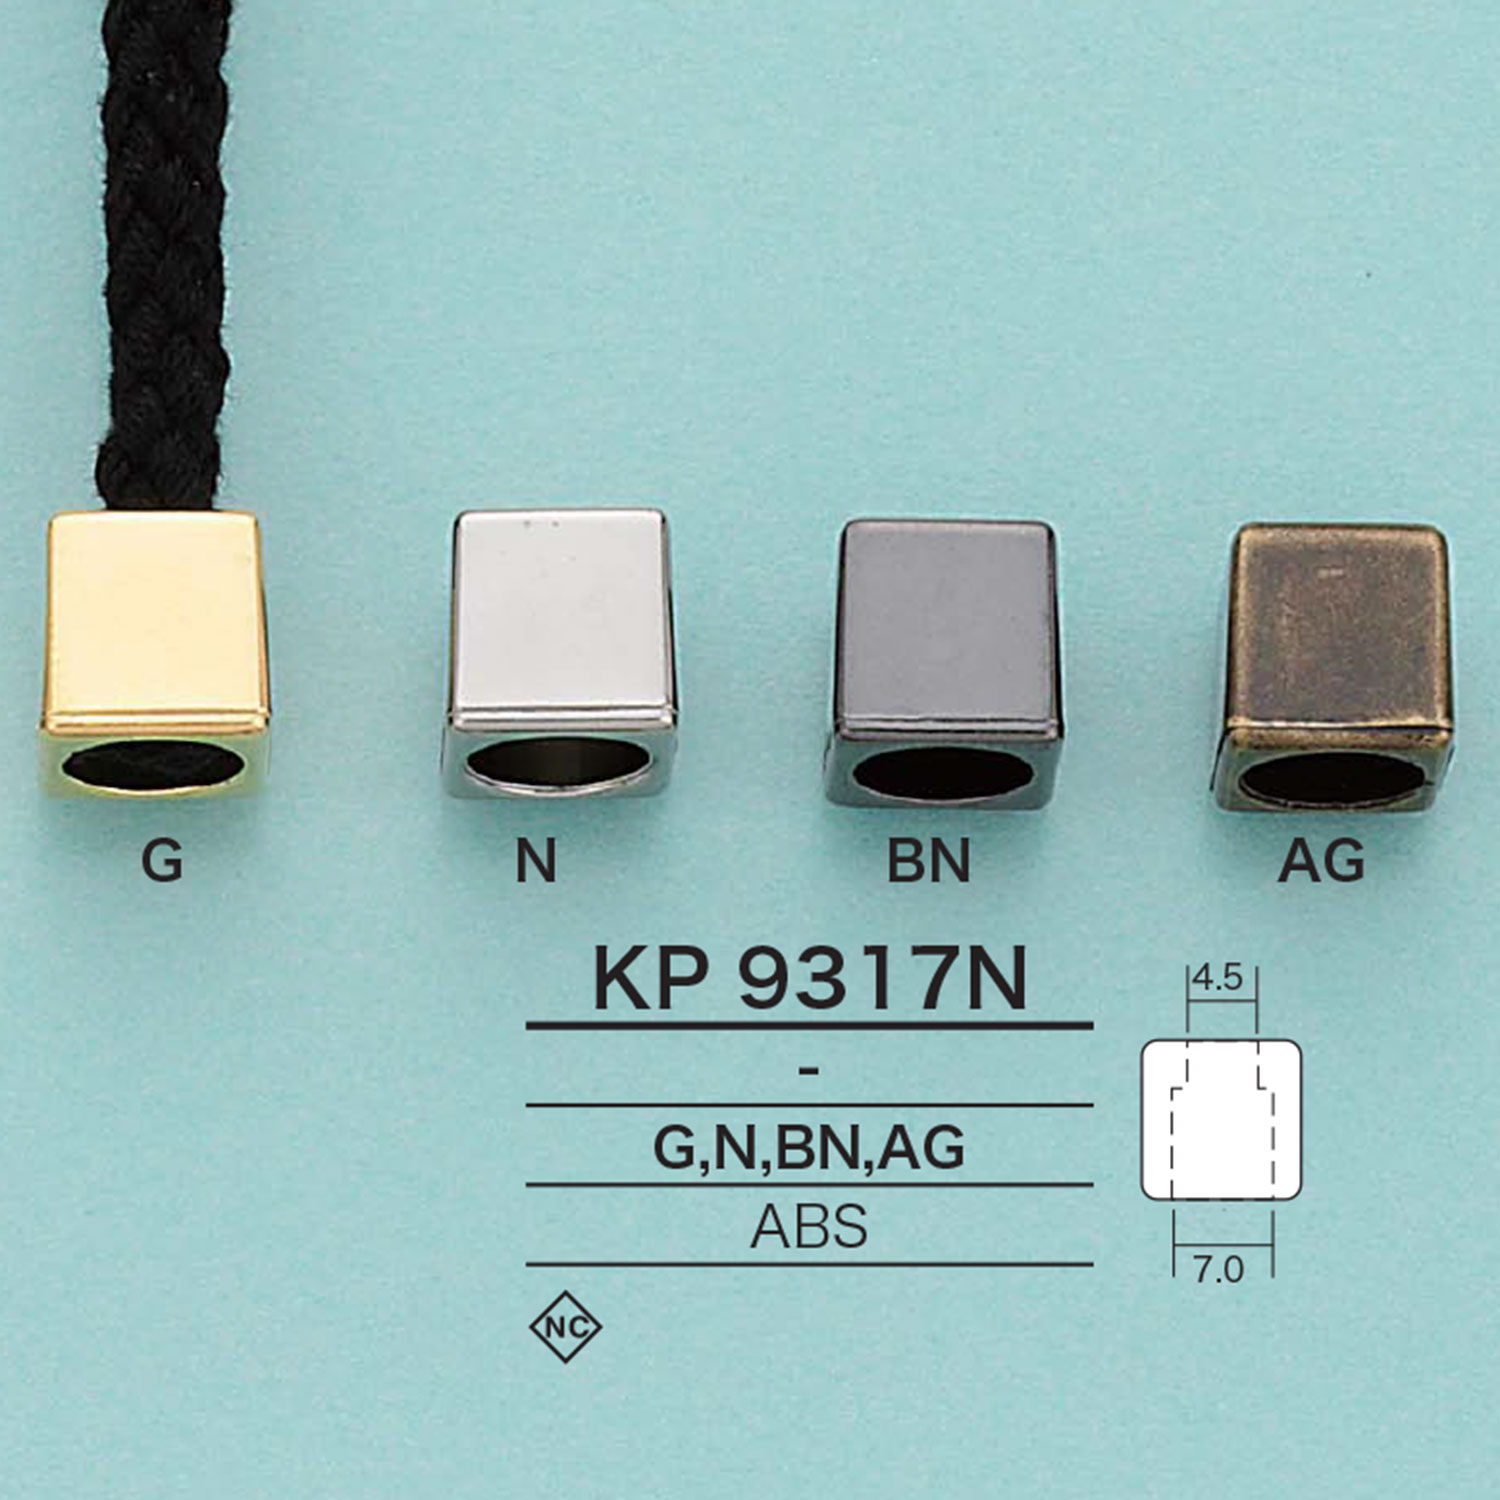 KP9317N Square Cord End(Plating)[Buckles And Ring] IRIS